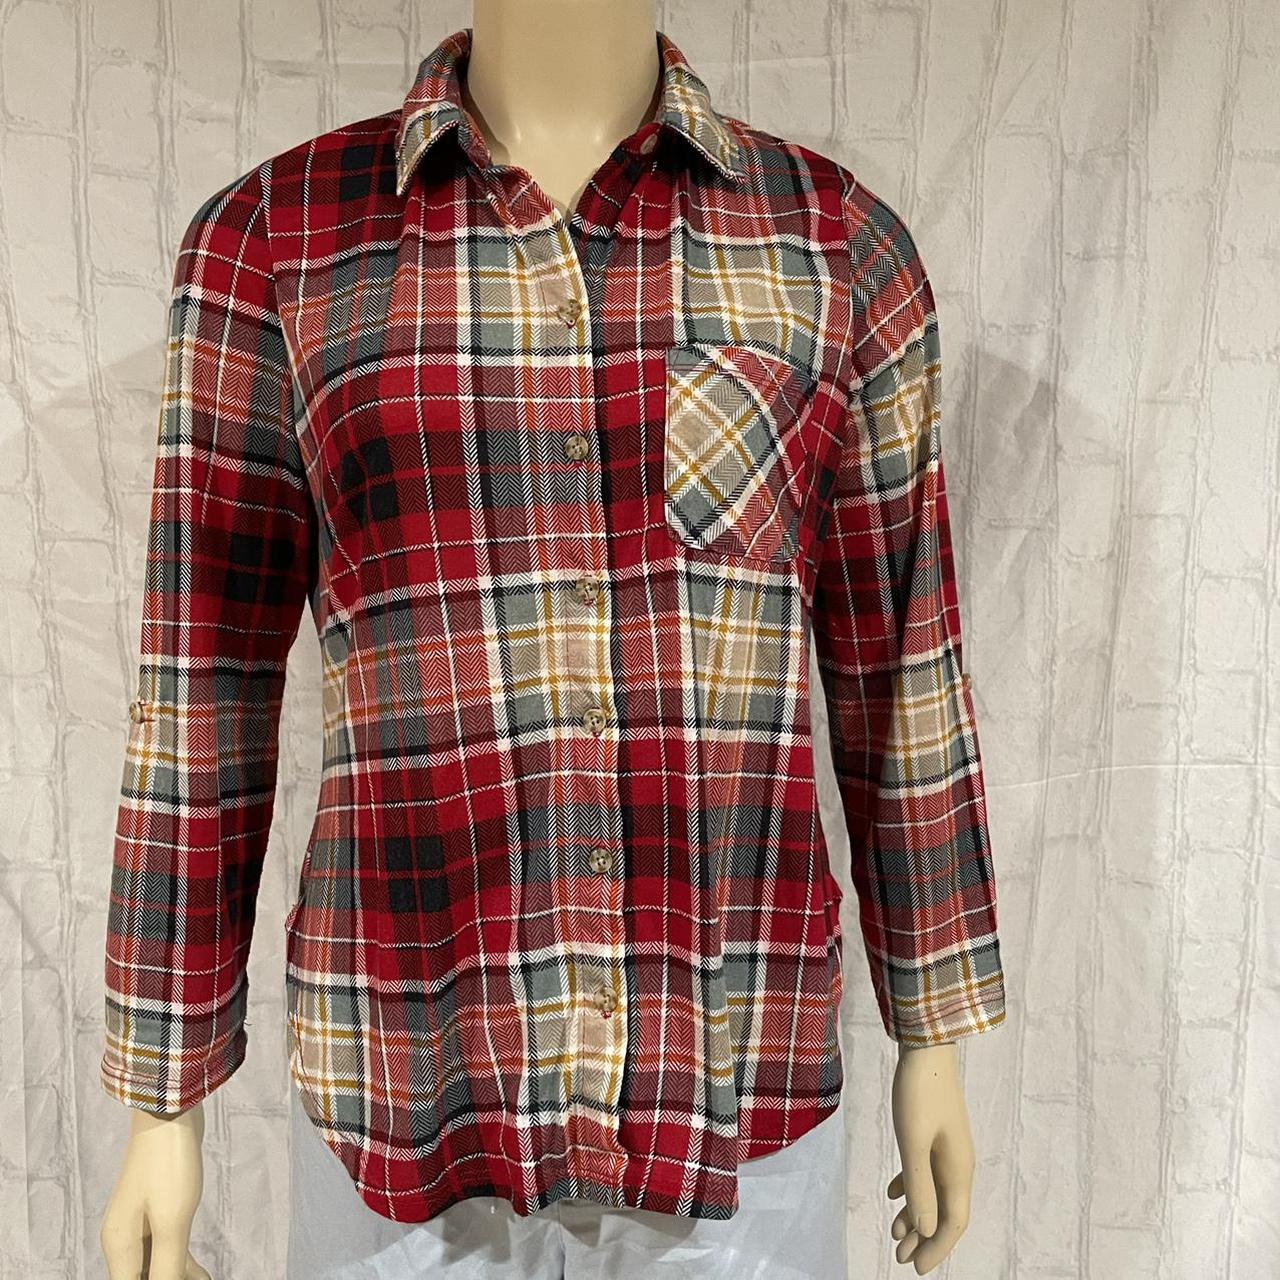 Product Image 2 - Polly & Esther Women’s Plaid